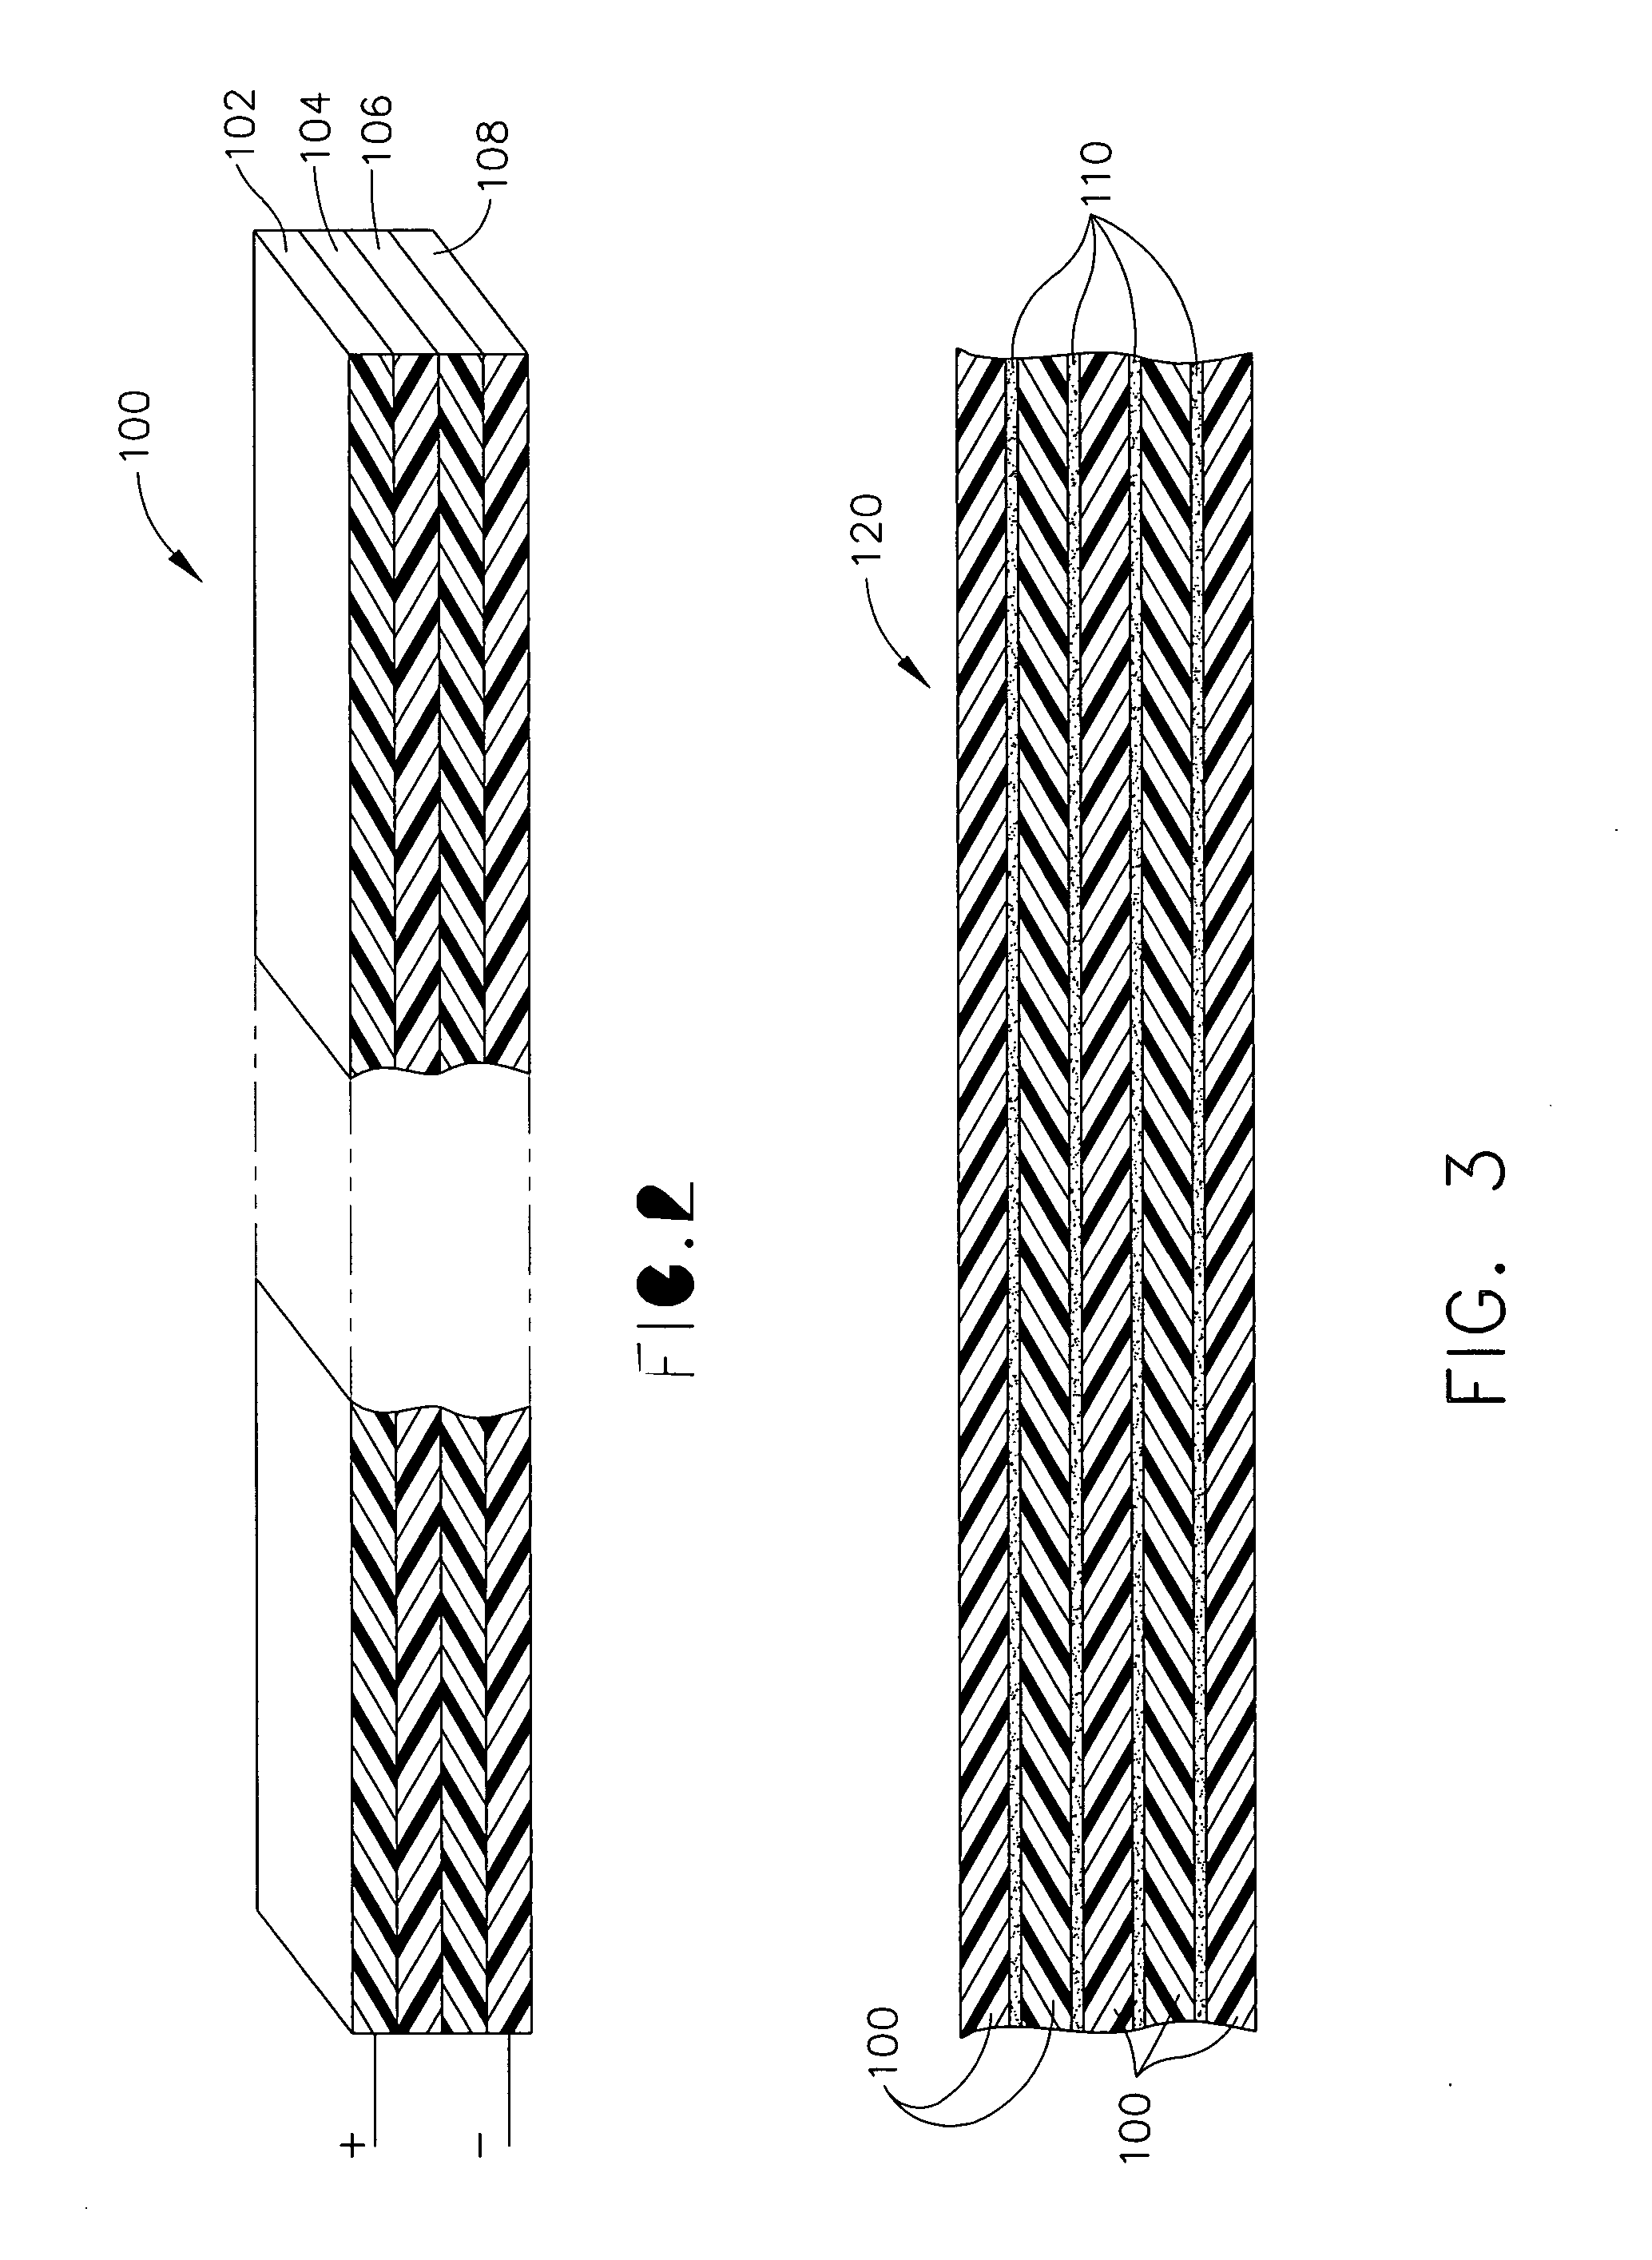 Surgical stapling instrument incorporating an electroactive polymer actuated firing bar track through an articulation joint